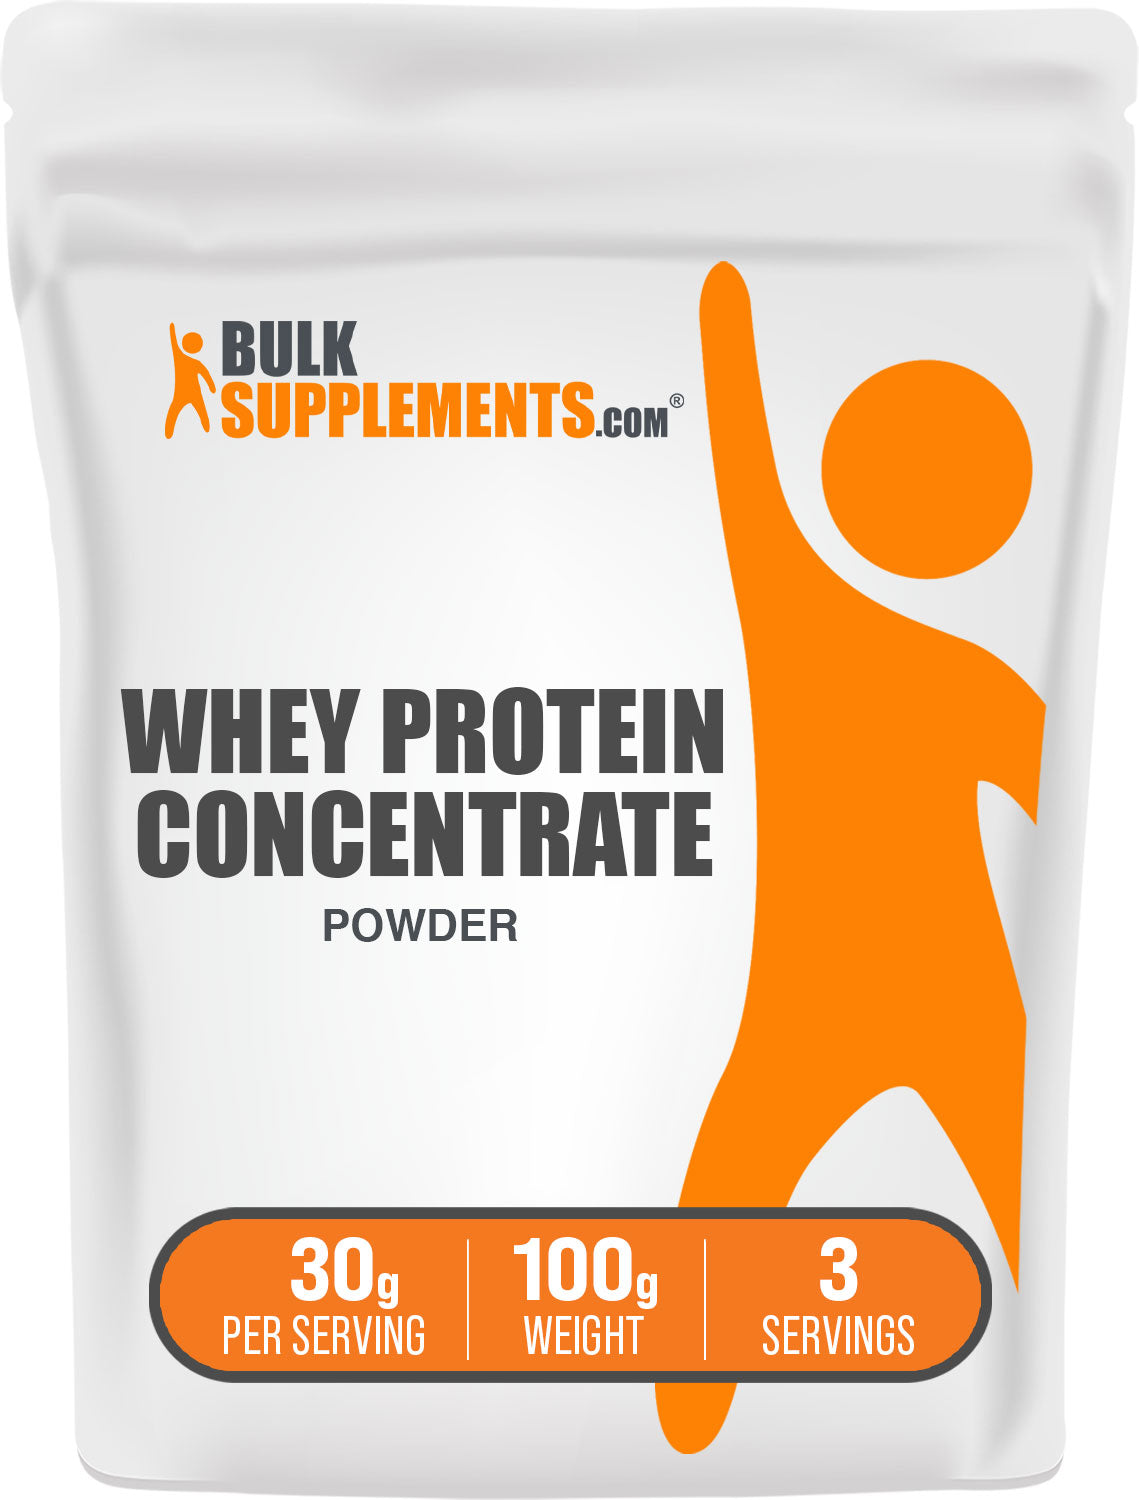 BulkSupplements Whey Protein Concentrate 80% Powder 100g bag